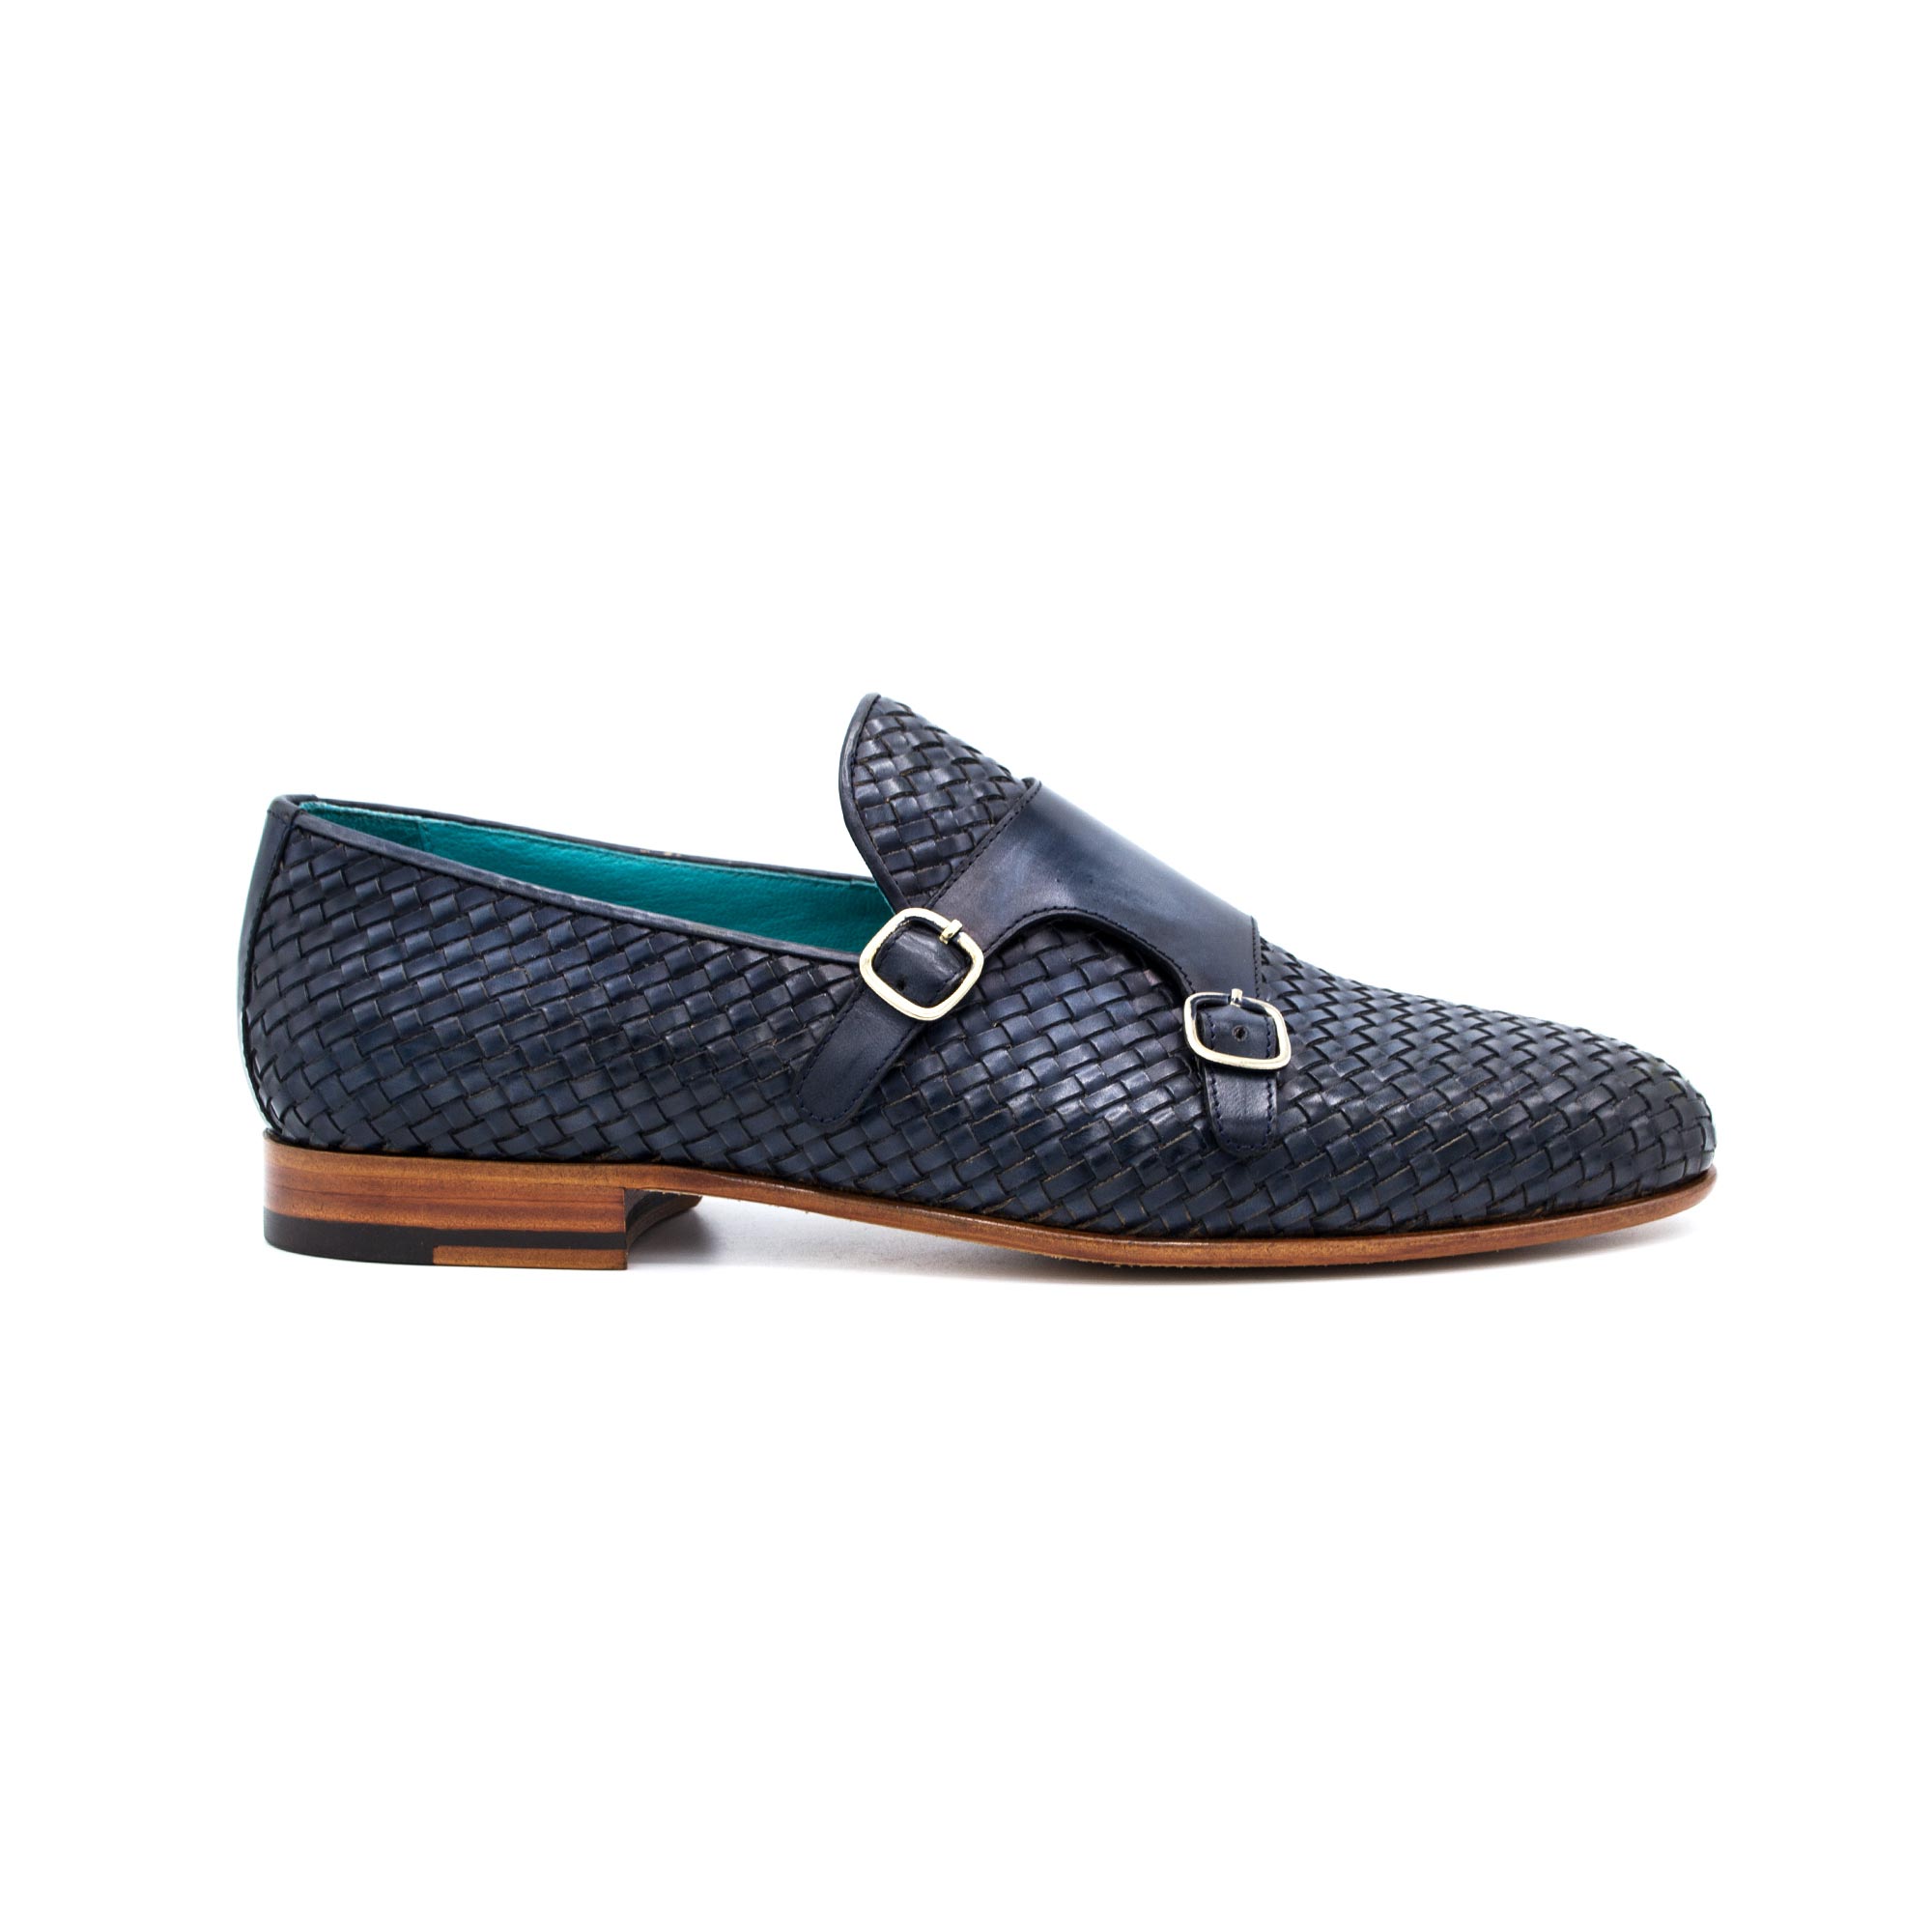 Navy Blue Tressed Monk Strap Shoes | Zerbay Collection